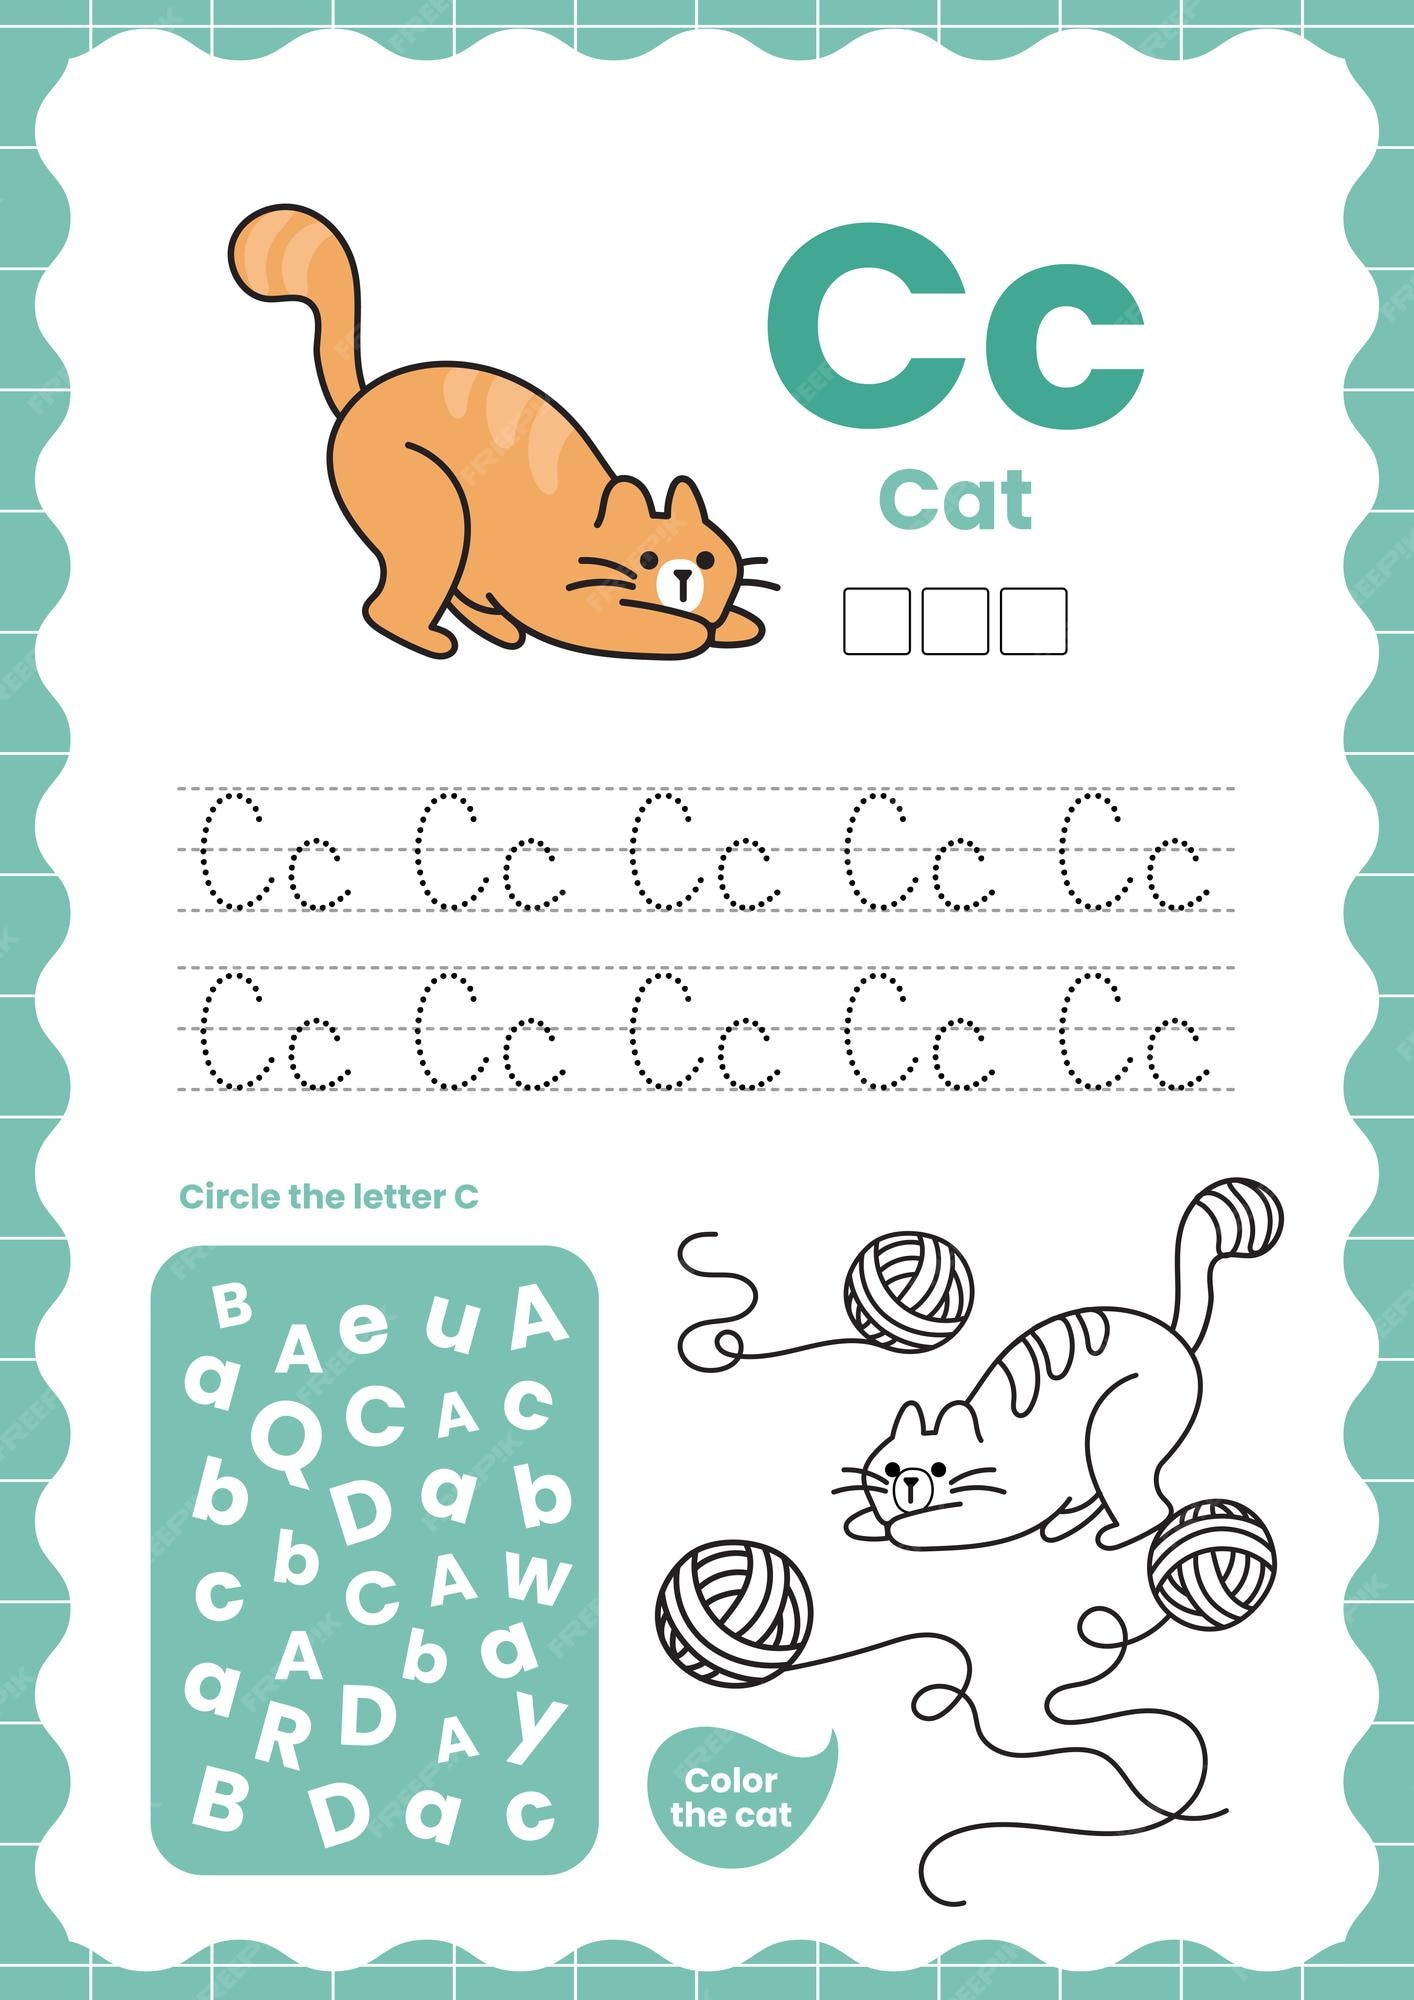 Letter Tracing book for kid: ABC Alphabet Coloring Book.: Handwriting  Practice Book A to Z For Kids : A Cat Cover Design. (Paperback)